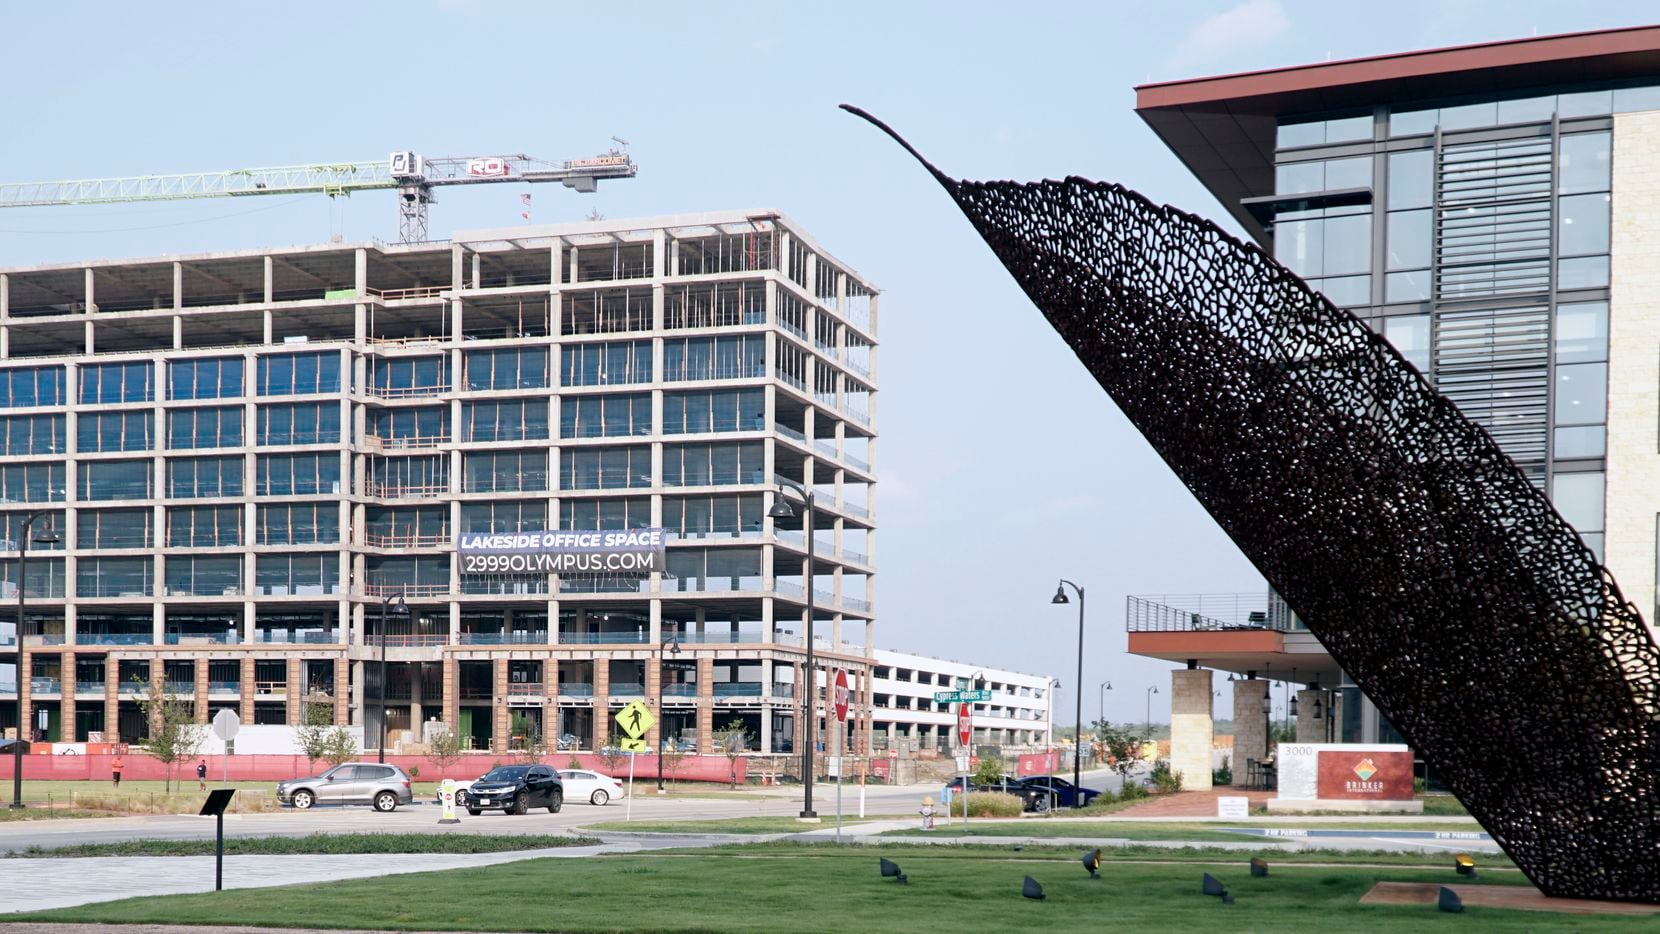 Developer Billingsley Co. is building a 10-story office tower in its Cypress Waters develpment and has recently filed building permits for two more office buildings in the project near LBJ Freeway and Belt Line Road. (Lawrence Jenkins/Special Contributor)